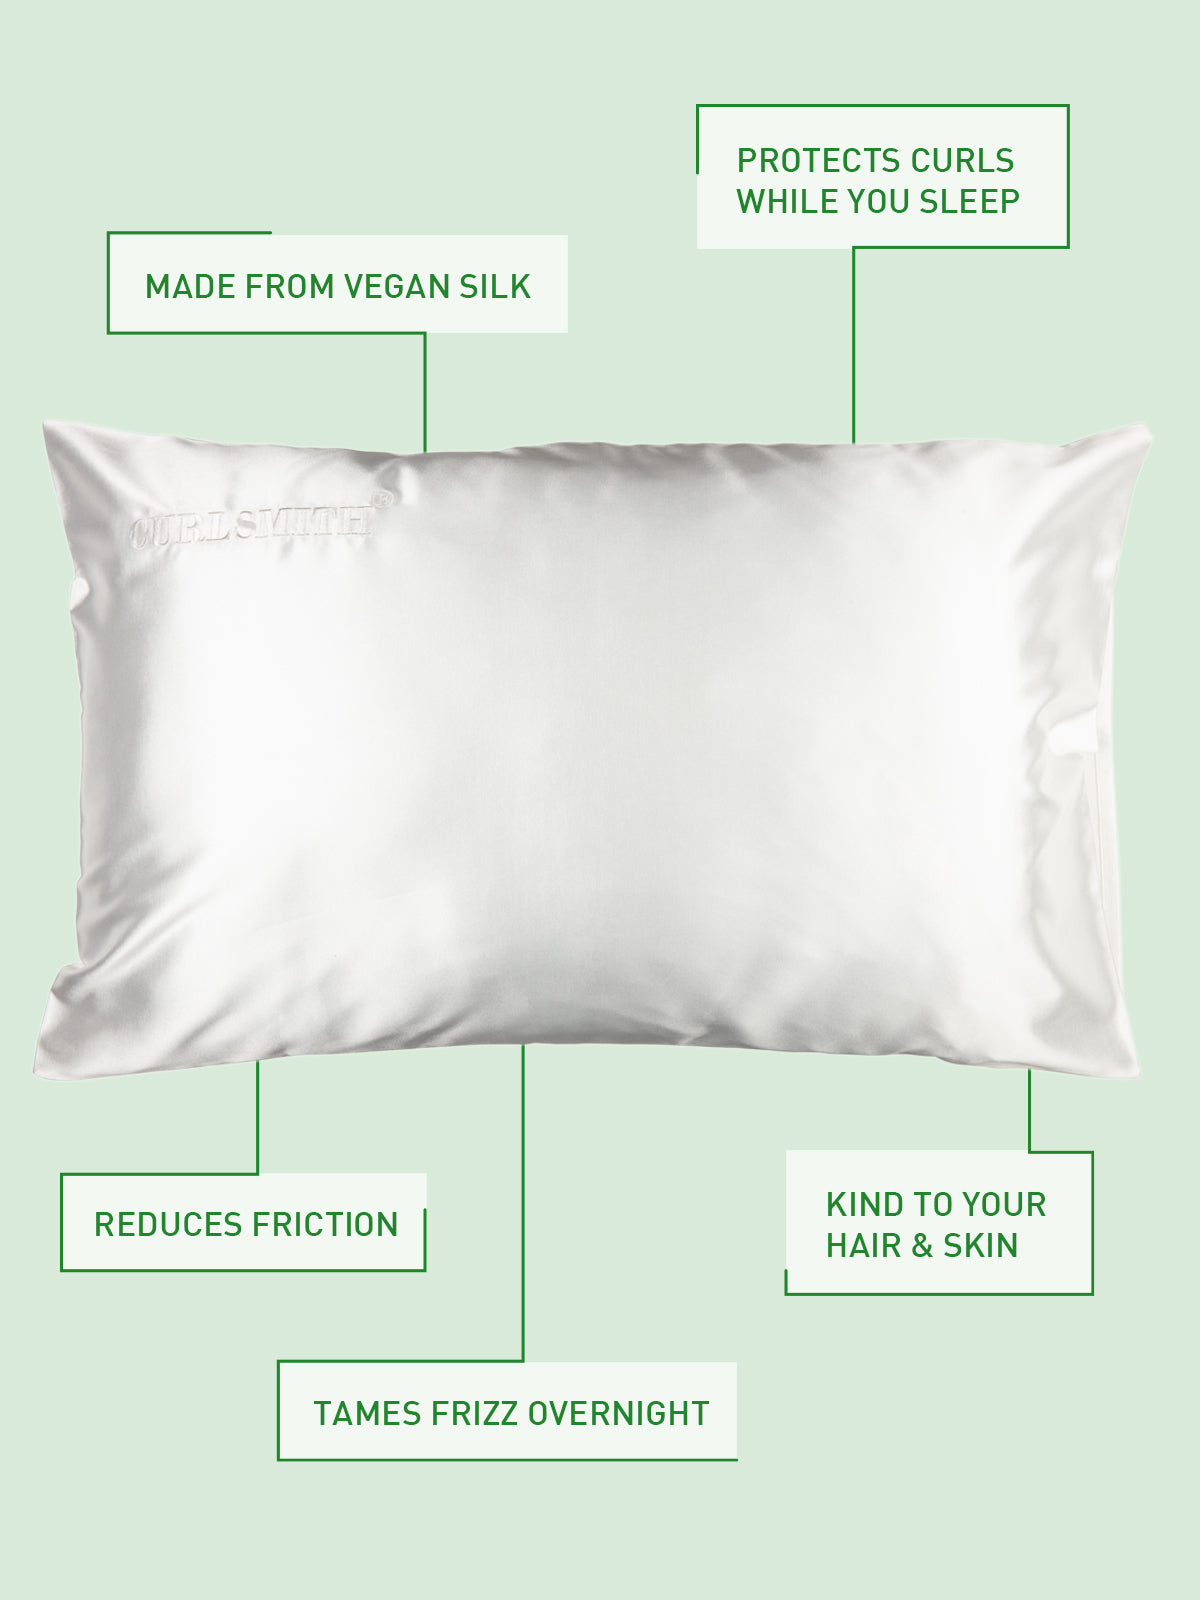 Benefits of a Satin Pillowcase For Curly Hair